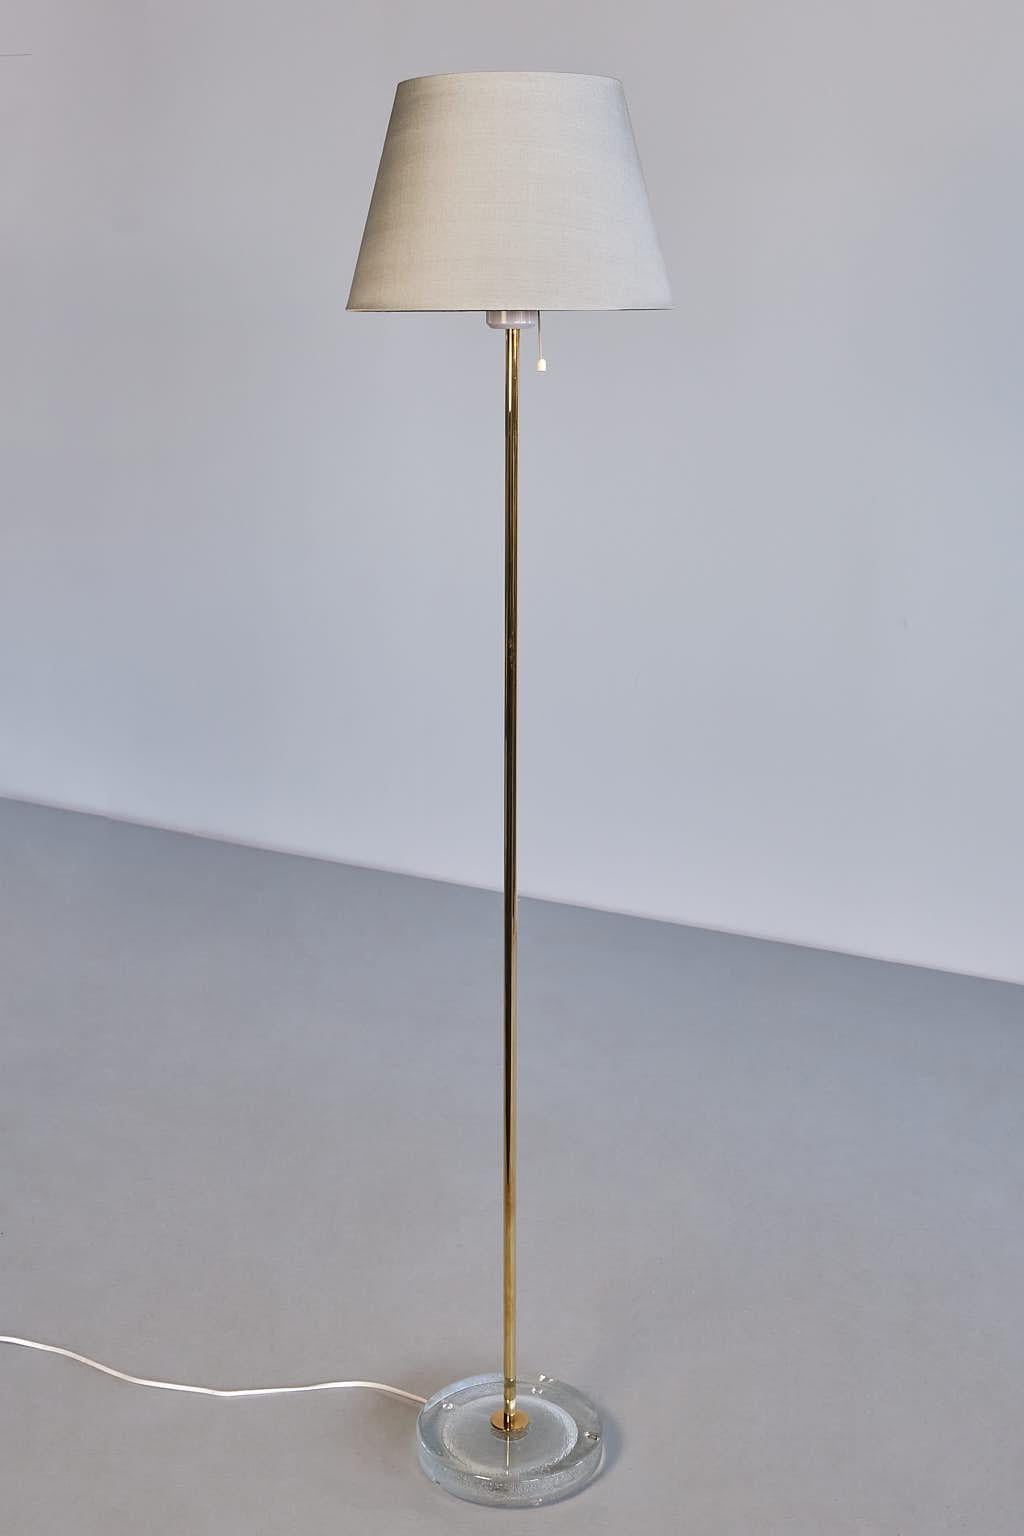 This elegant floor lamp was produced by Falkenbergs Belysning in Sweden in the 1960s. The lamp is marked with the manufacturer's sticker on the inside of the lamp fitting.
The design is composed of a slightly raised, circular foot in textured glass.